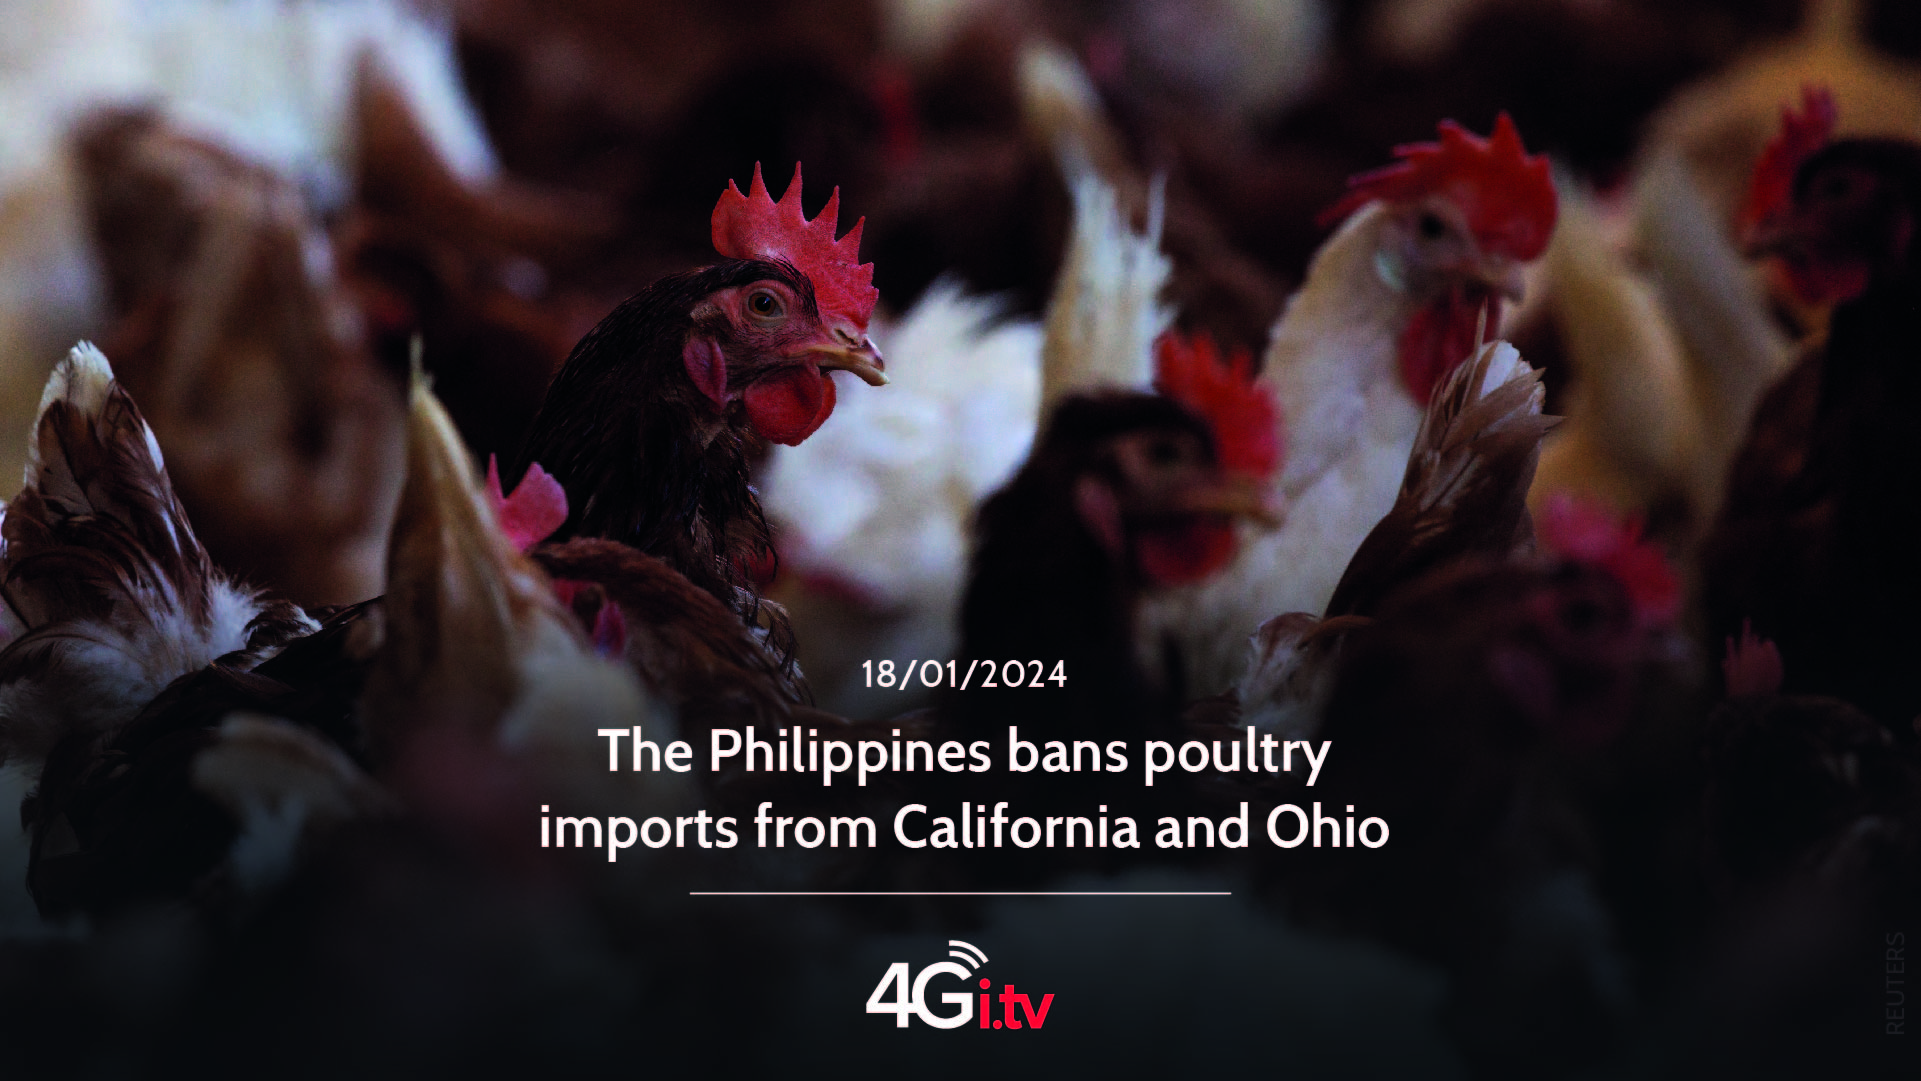 Подробнее о статье The Philippines bans poultry imports from California and Ohio